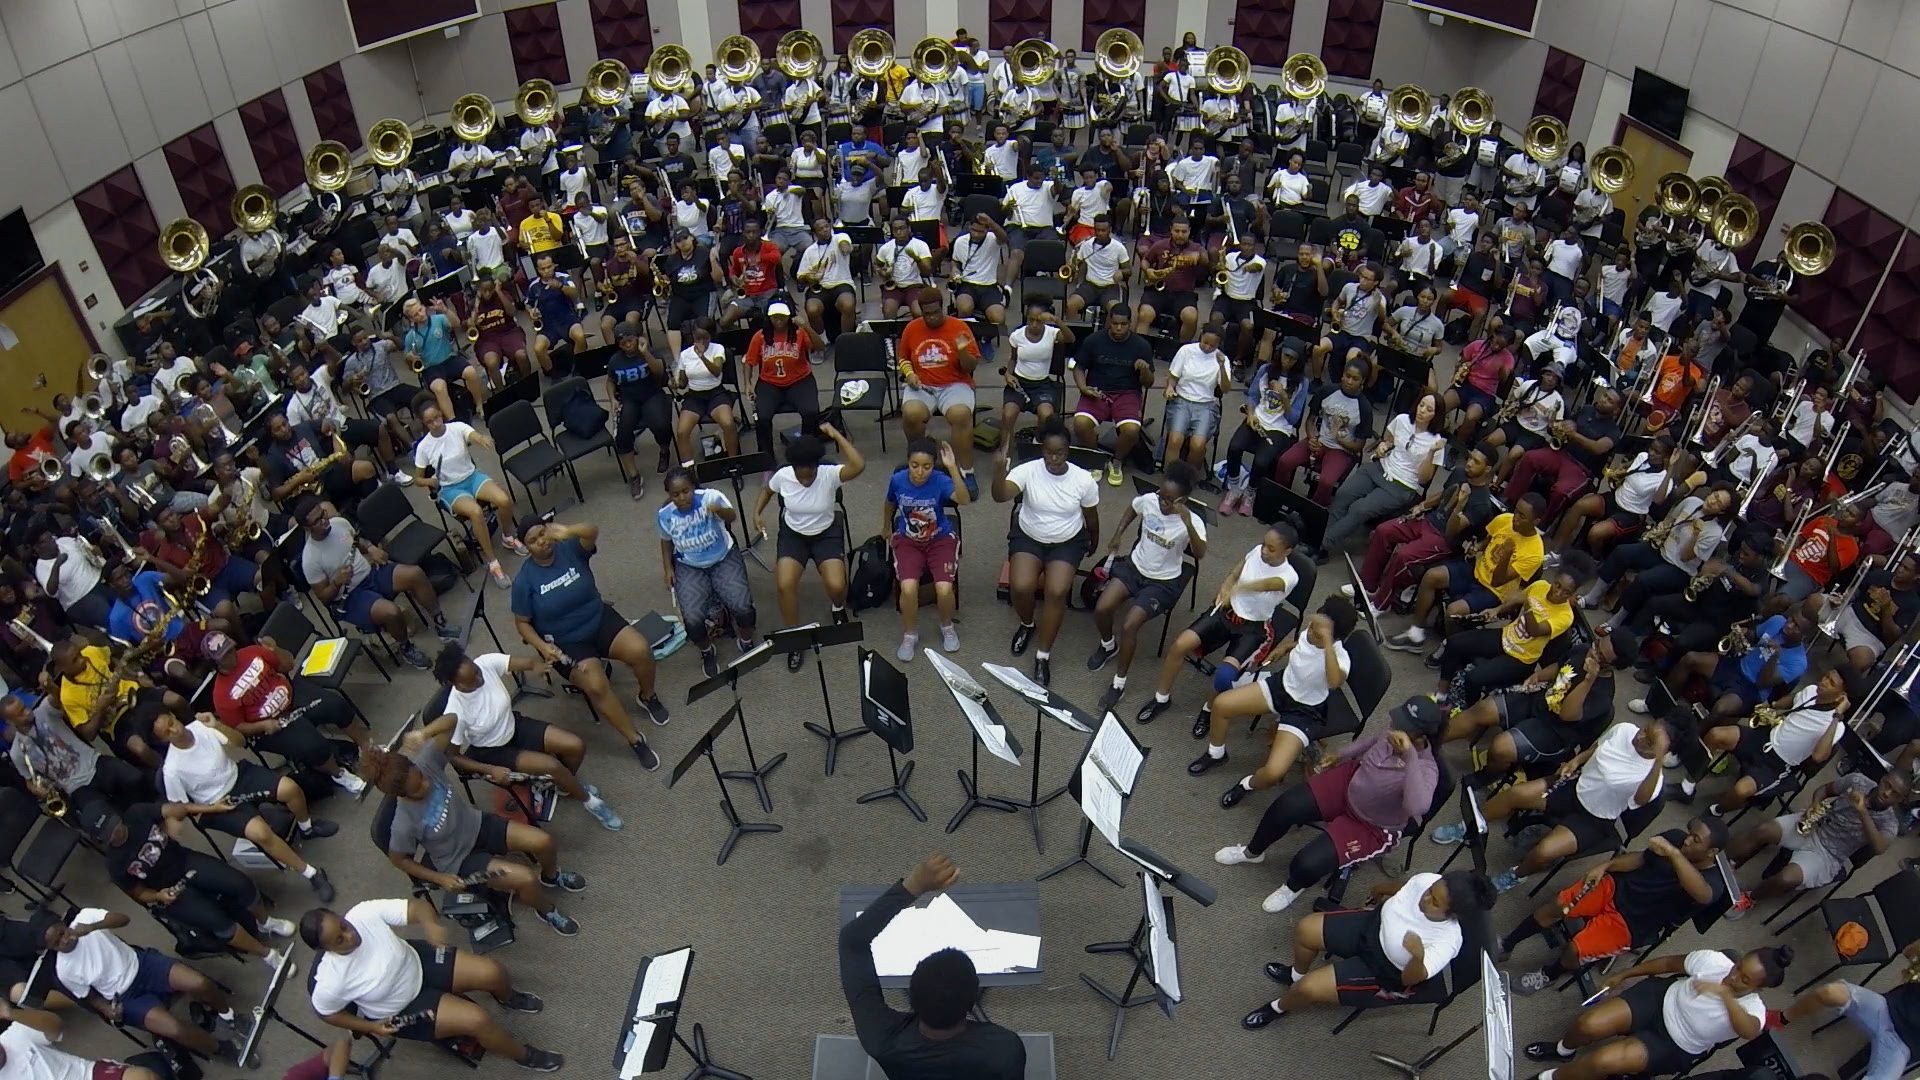 Band Practice, Rehearsal, Before Queen City Battle Of The Bands, Bethune-Cookman University, BCU, Marching Wildcats, Marching Orders, Stage 13 Original, stage13network